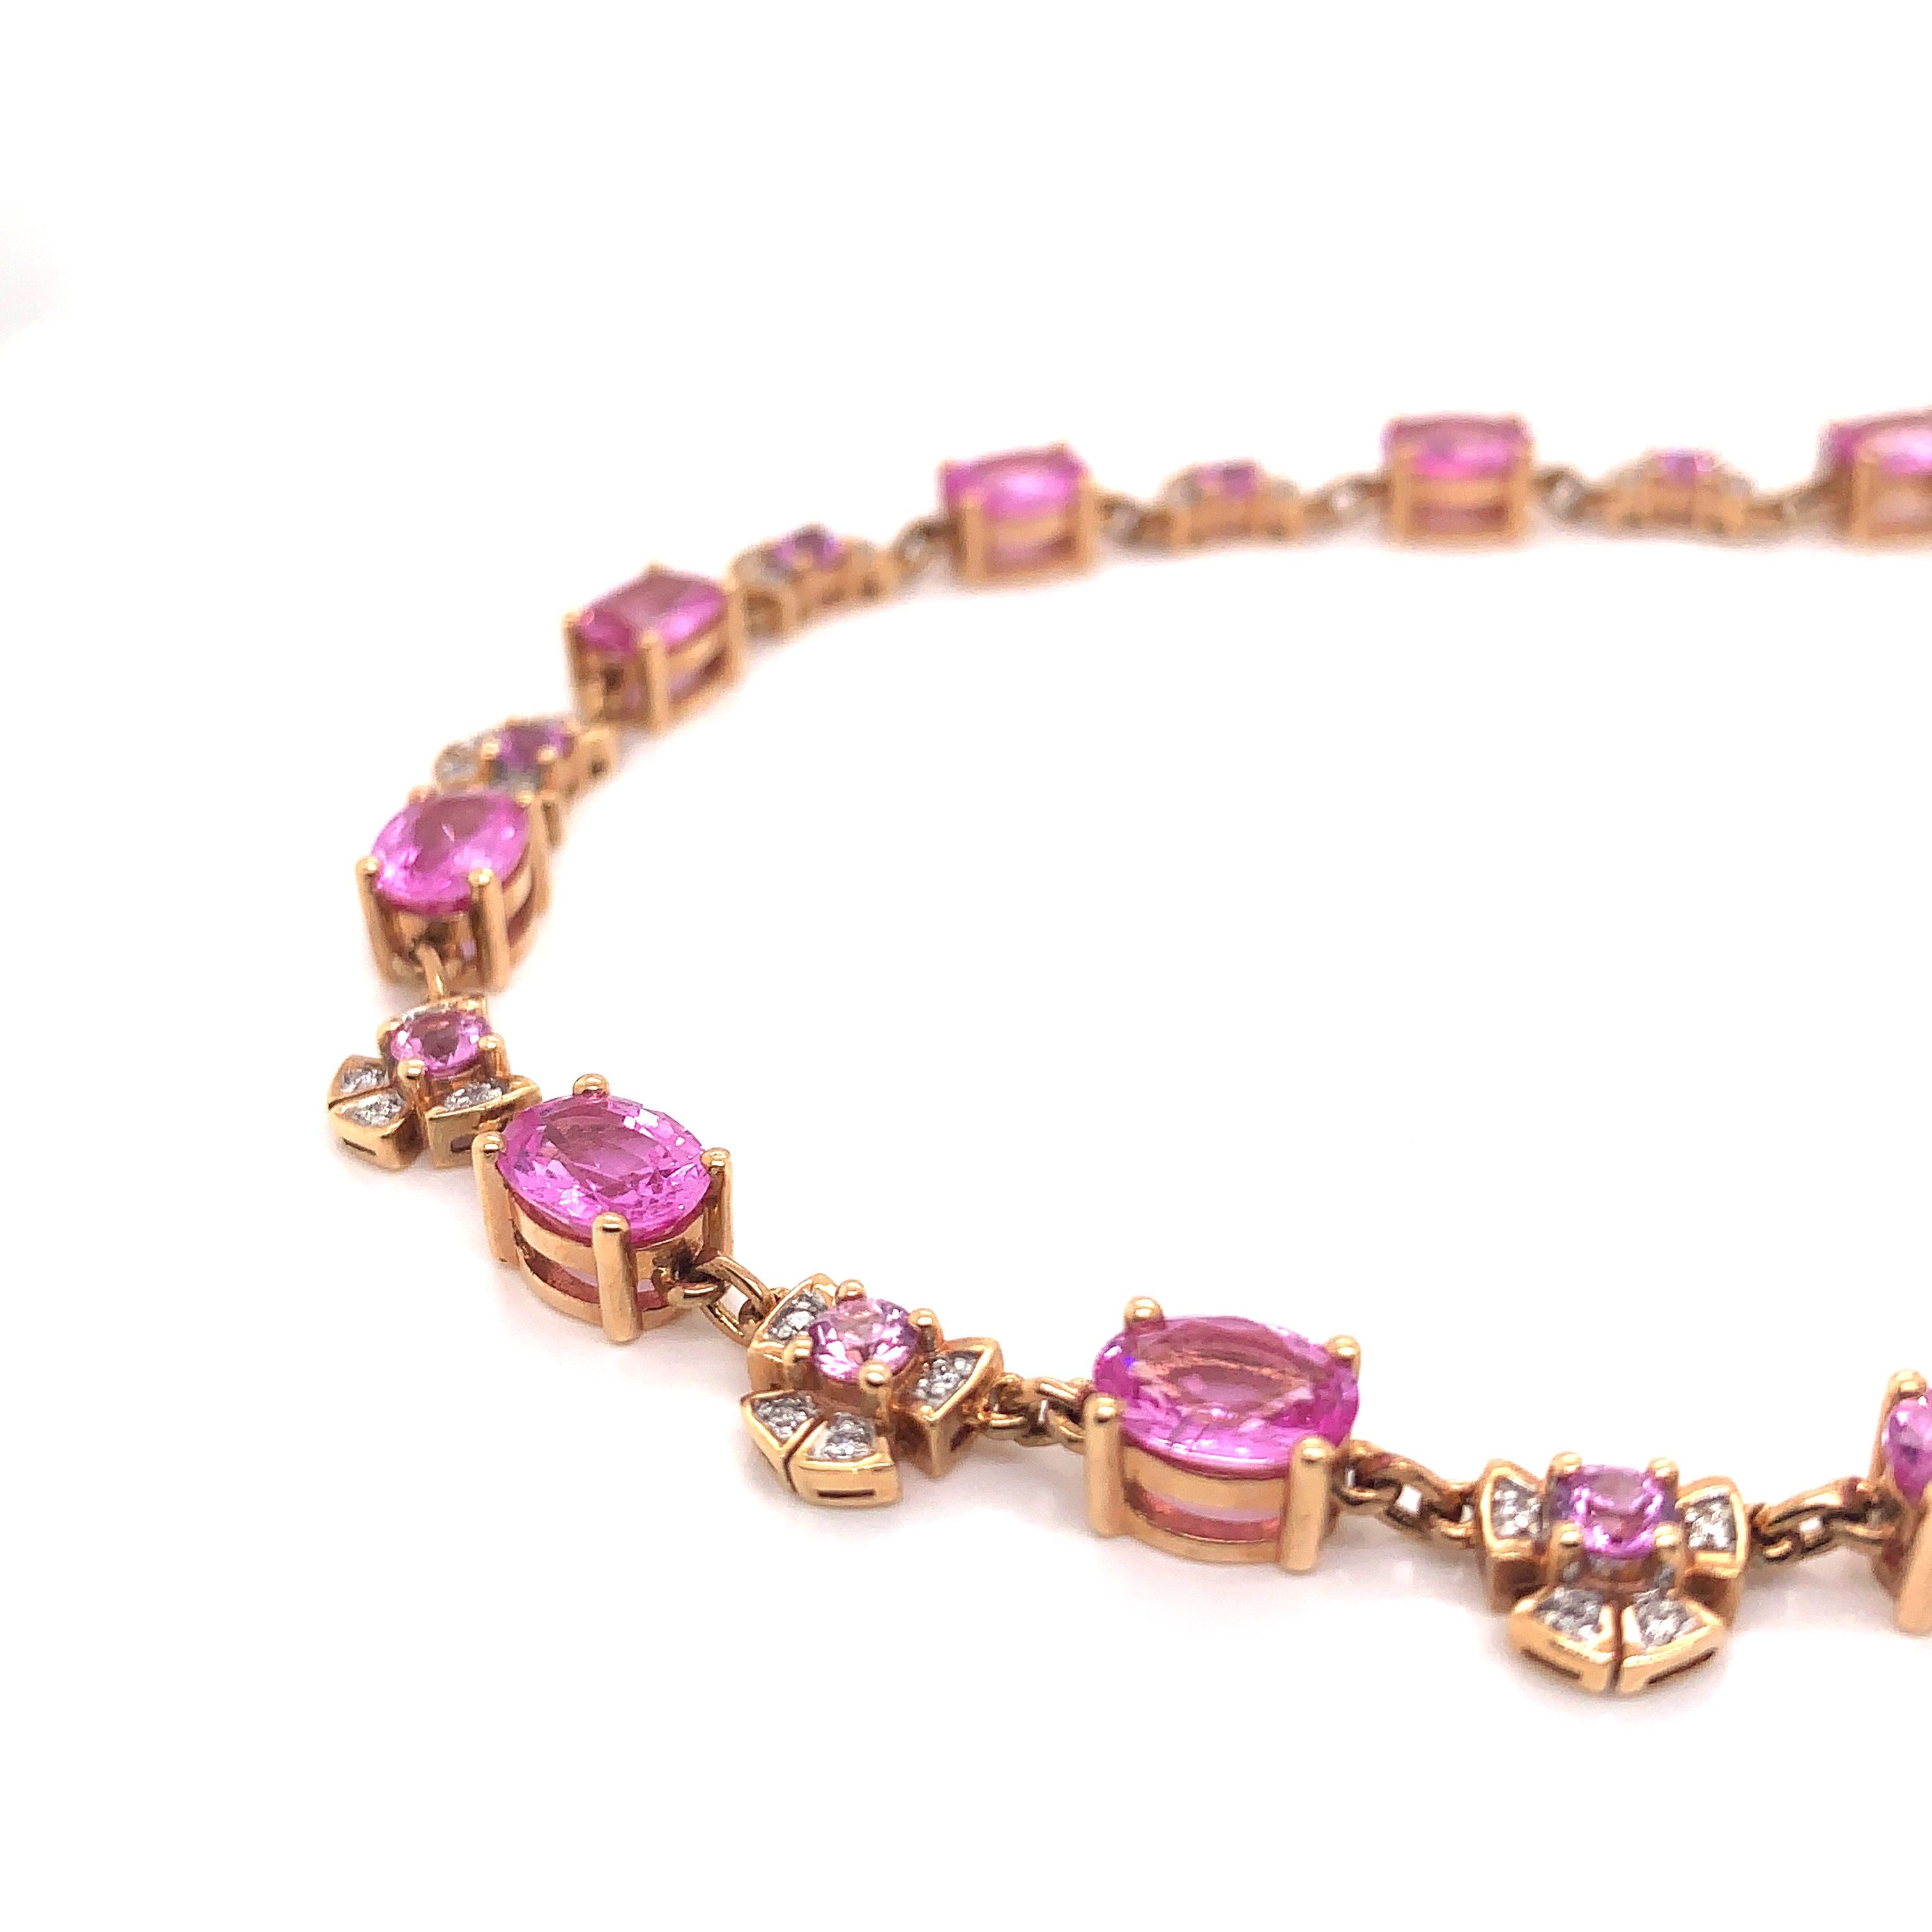 If you like to indulge in sweets, then you're definitely going to fall in love with these candy like 'jelly-bean' pink sapphires! This particular necklace showcases dazzling pink sapphires that are almost candy like! 

Designer pink sapphire